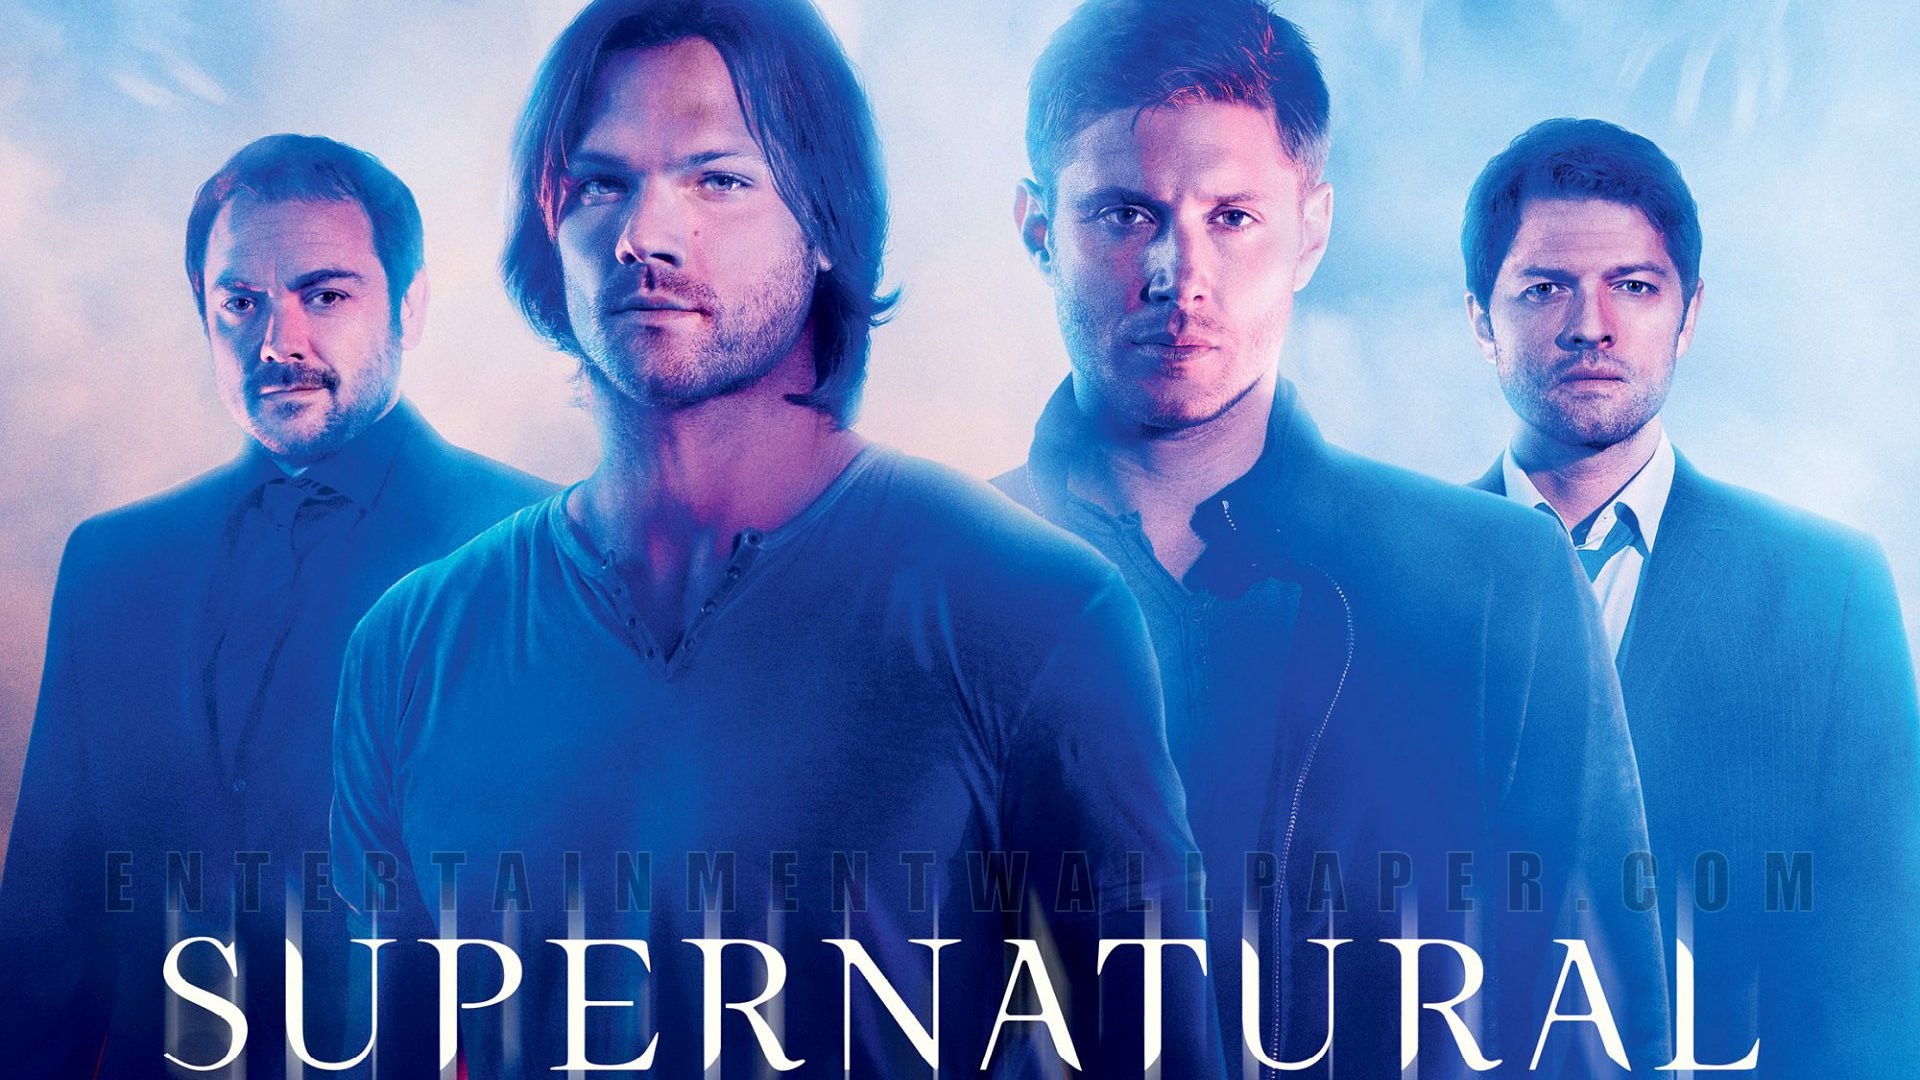 1920x1080 ... Supernatural HD Background Wallpapers, G.sFDcY Wallpapers ...